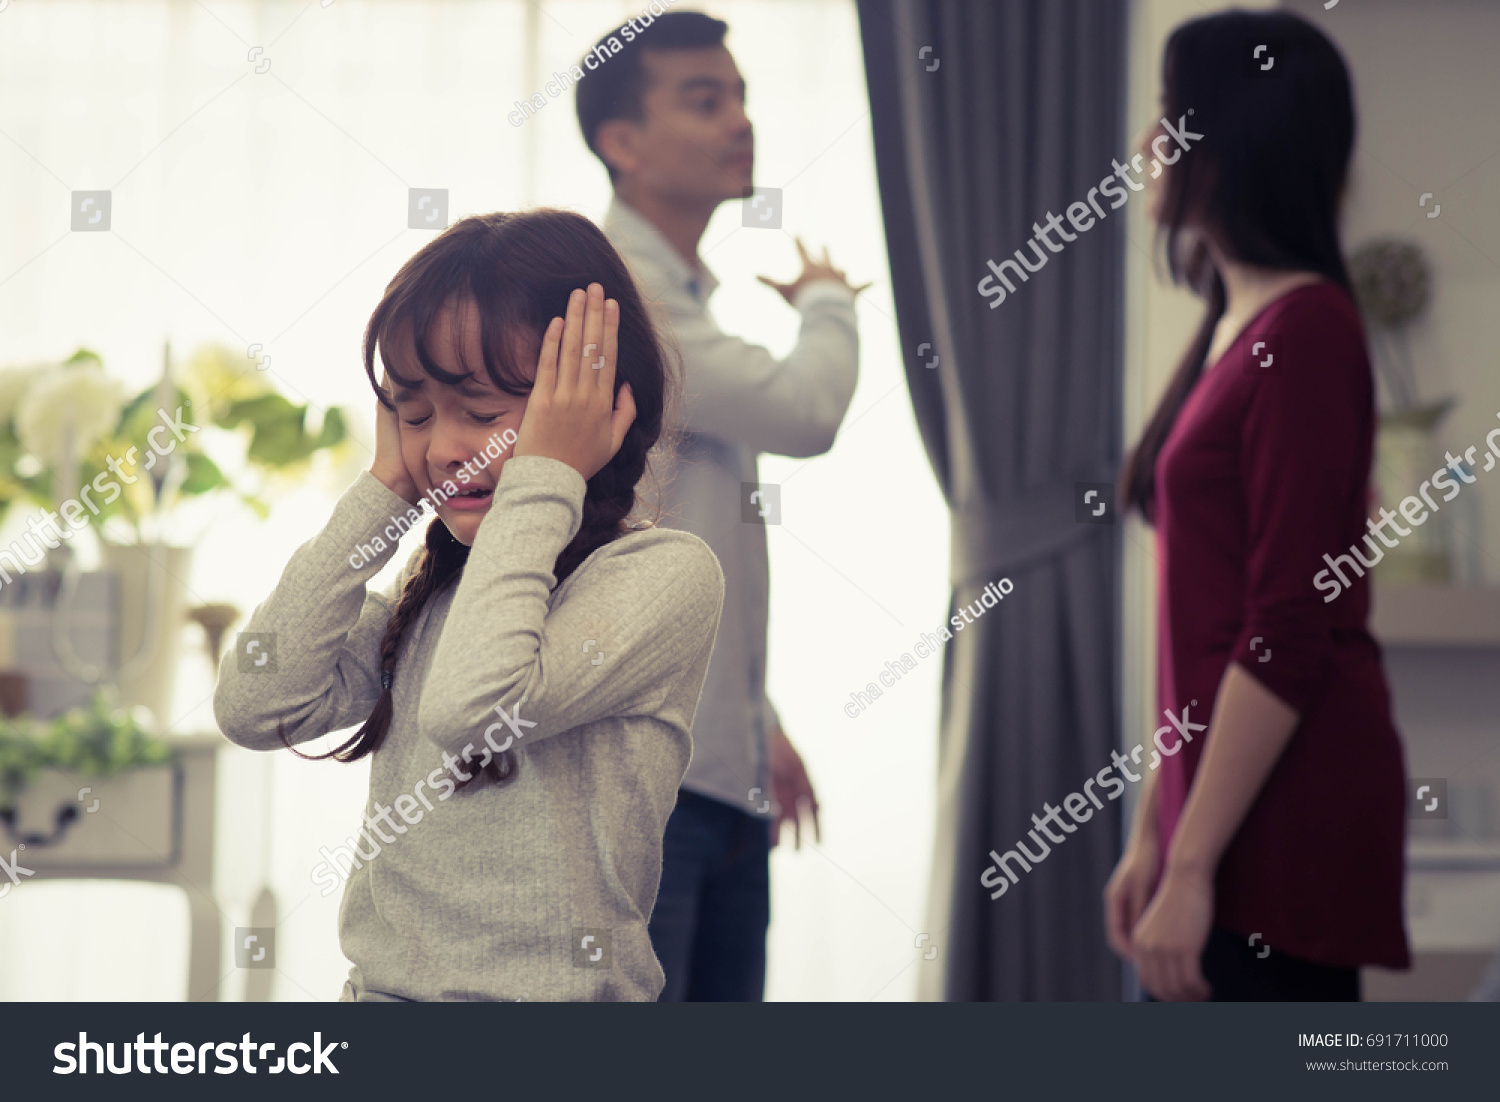 Little Girl Unhappy And Crying Fighting Parents Behind. Violence and Divorce  Family concept. #691711000